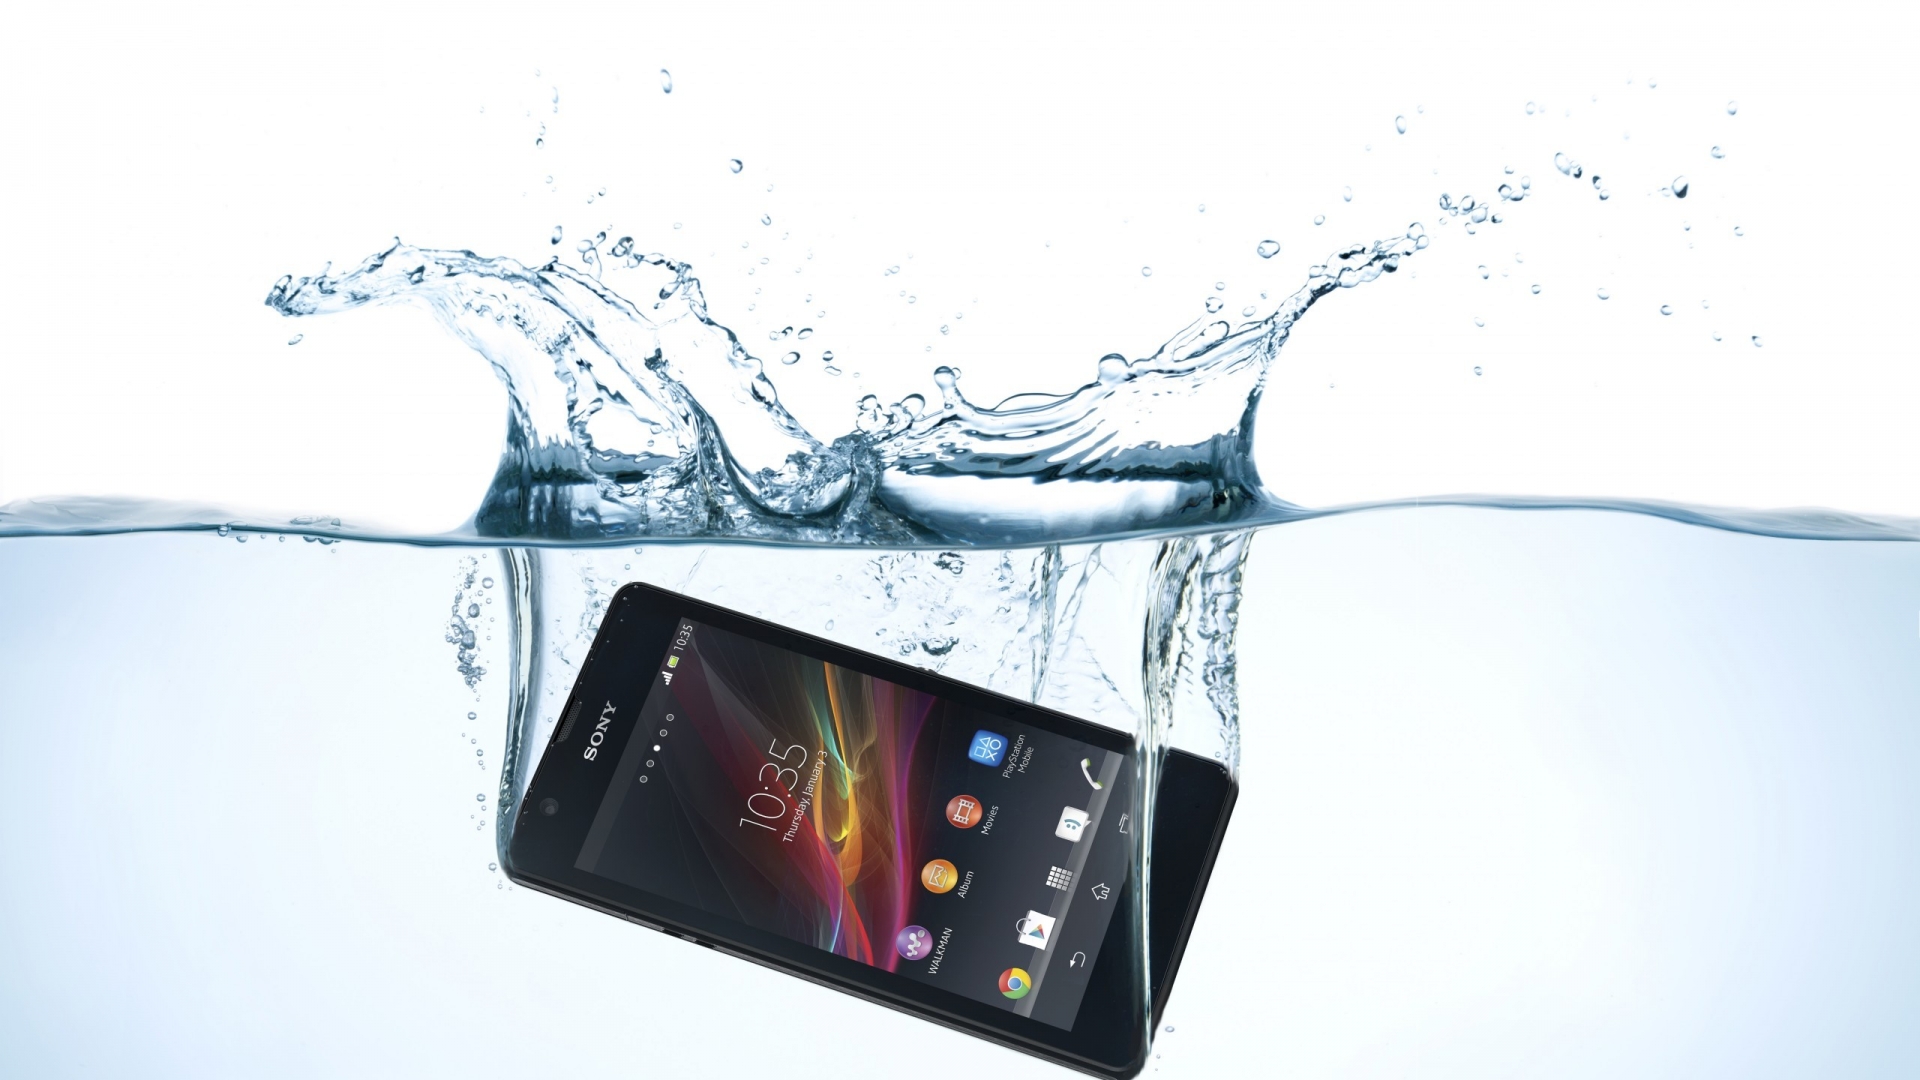 Sony Xperia Swimming for 1920 x 1080 HDTV 1080p resolution